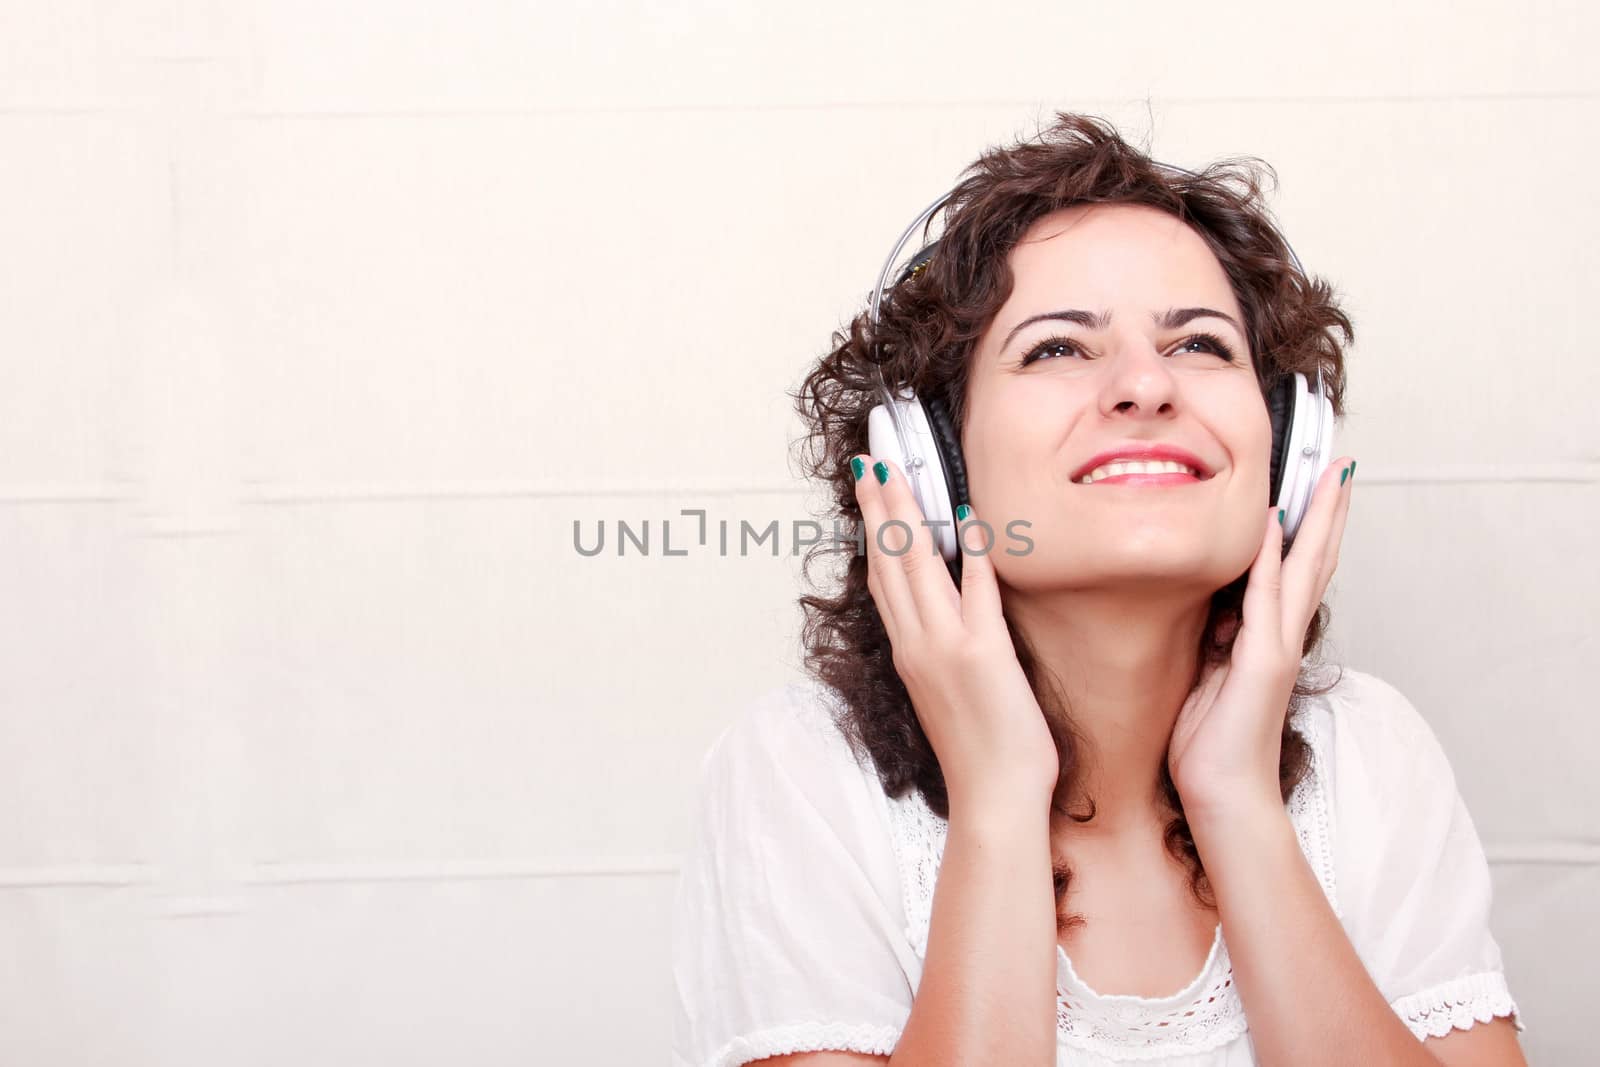 A young woman listening music with Headphones.